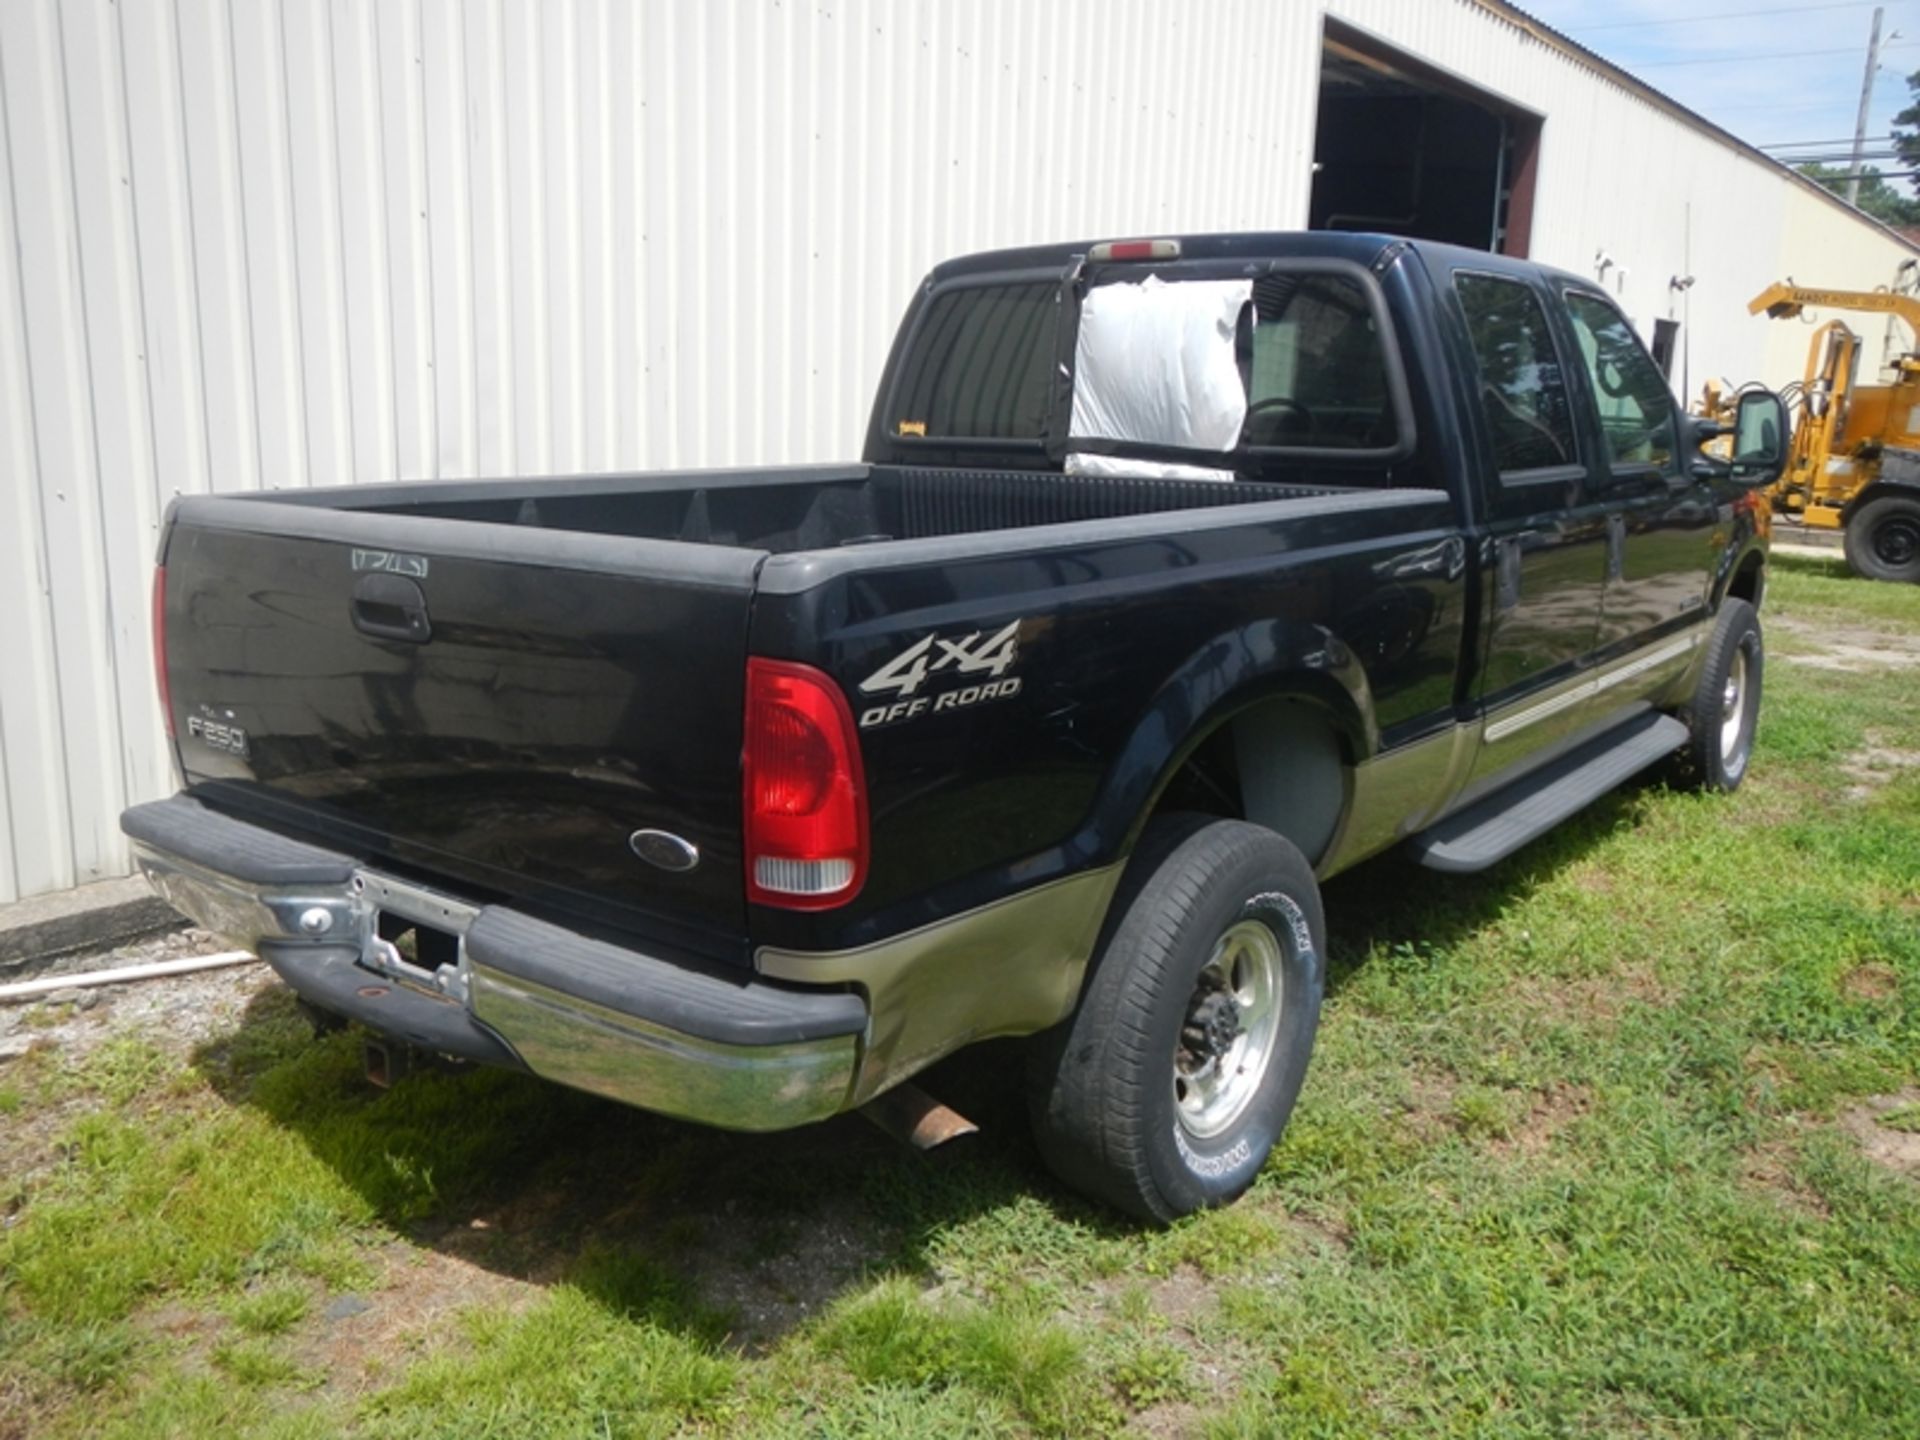 2000 FORD F250 4WD, crew cab, 7.3 diesel, 217,651 miles - 1FTNW21F1YED31218 - Image 3 of 6